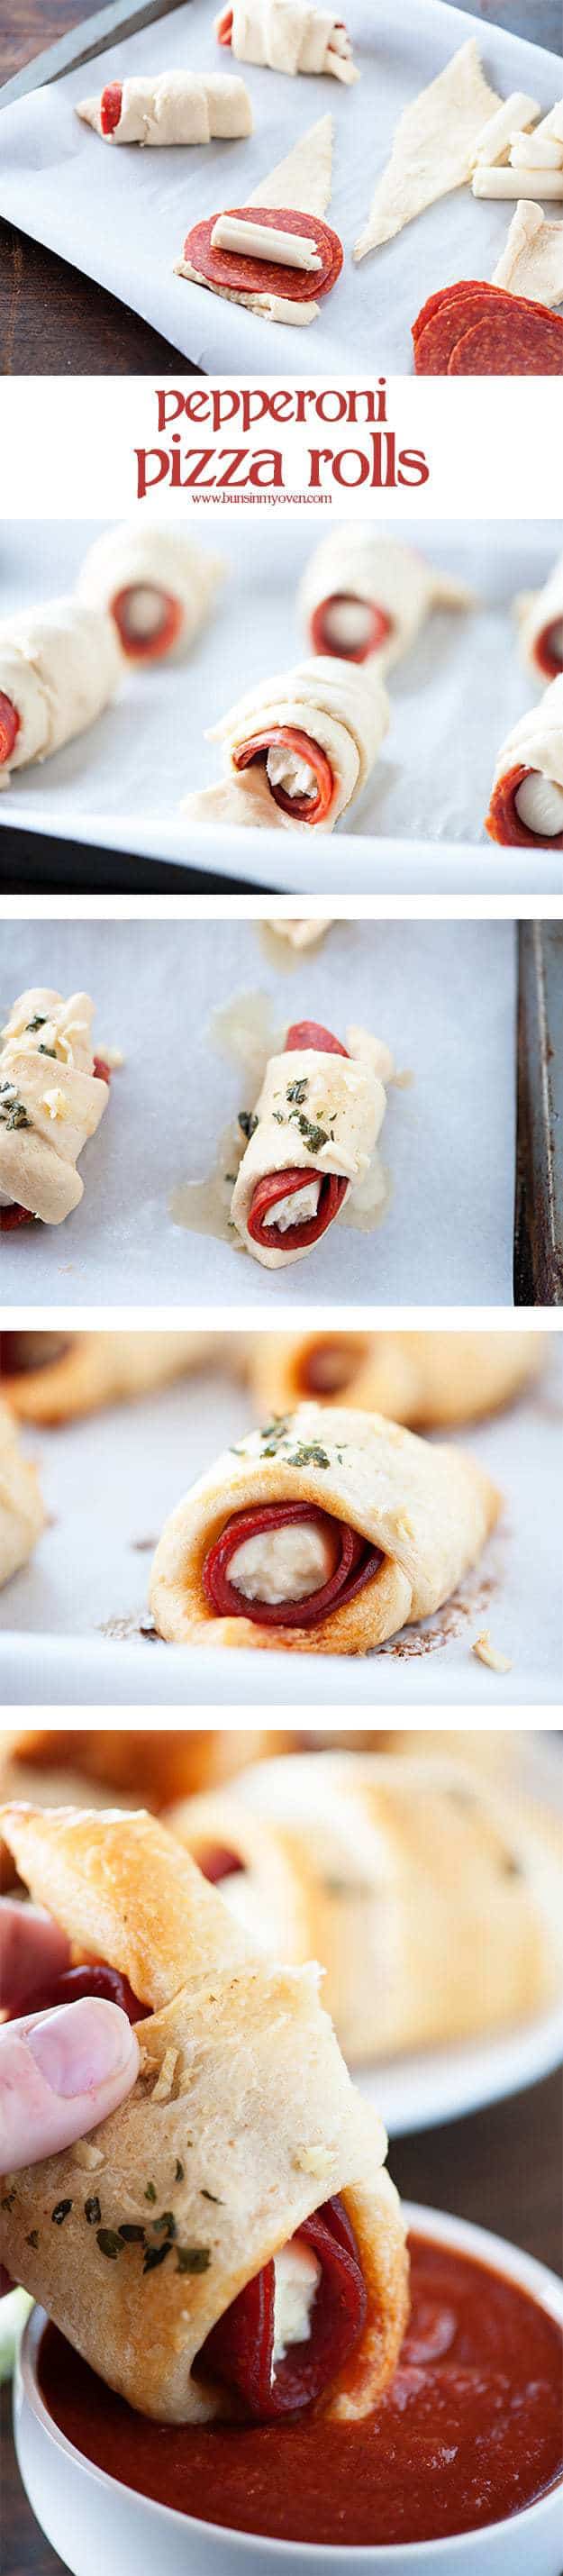 Easy to make pepperoni pizza rolls!